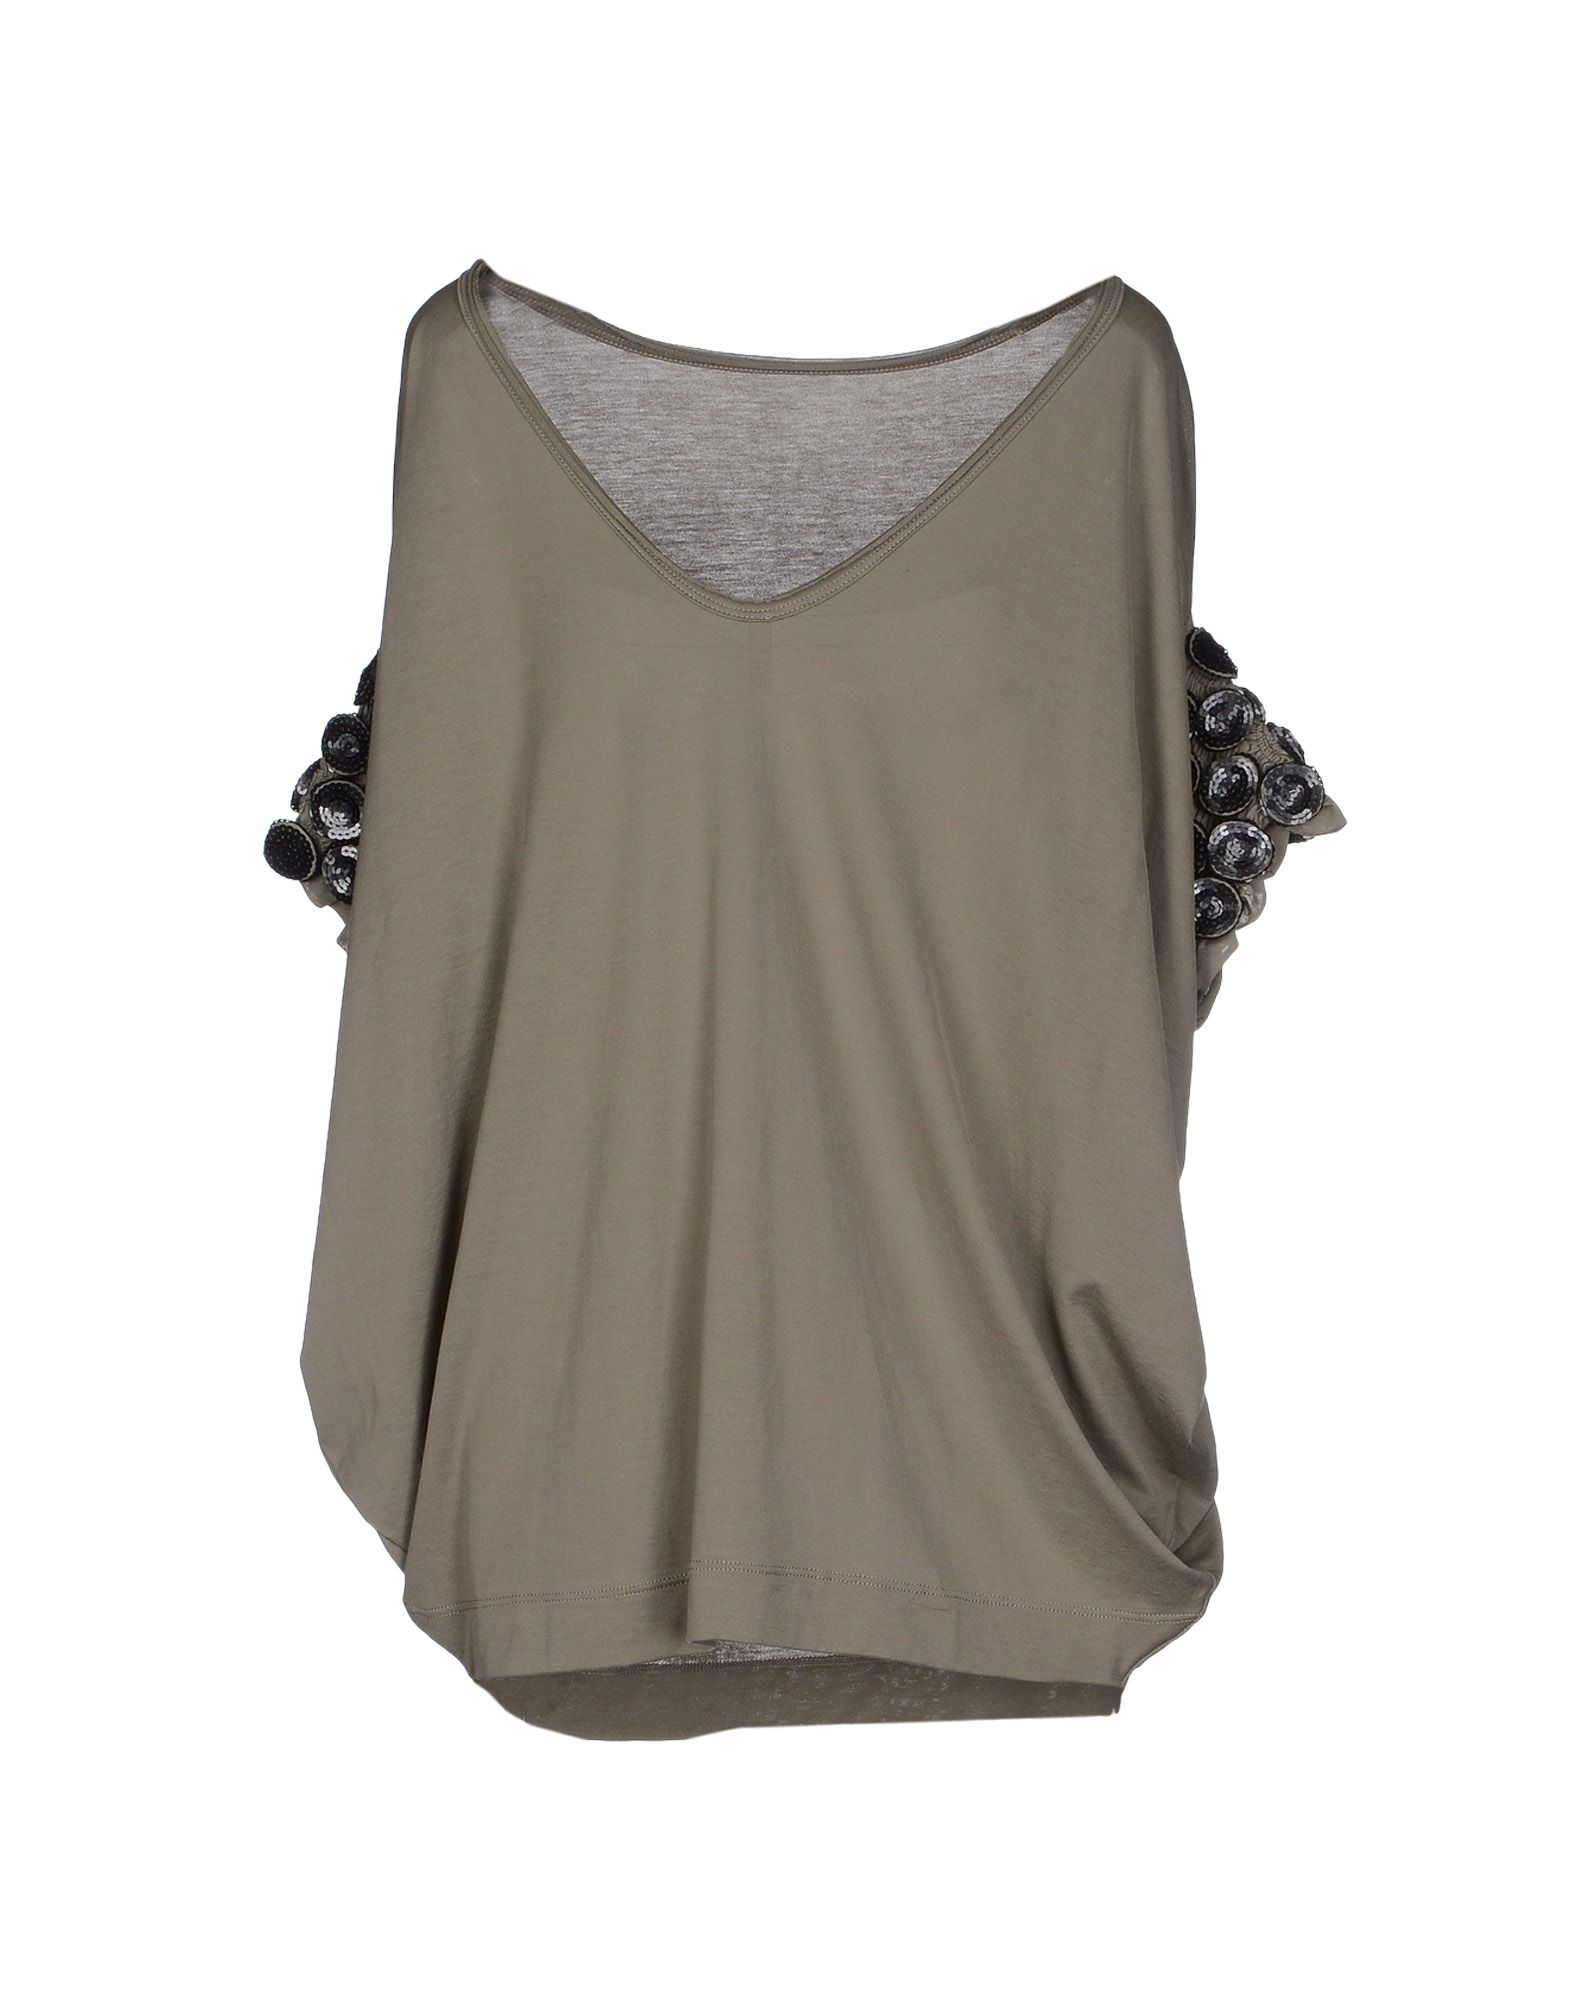 Lyst - Nude T-shirt in Gray